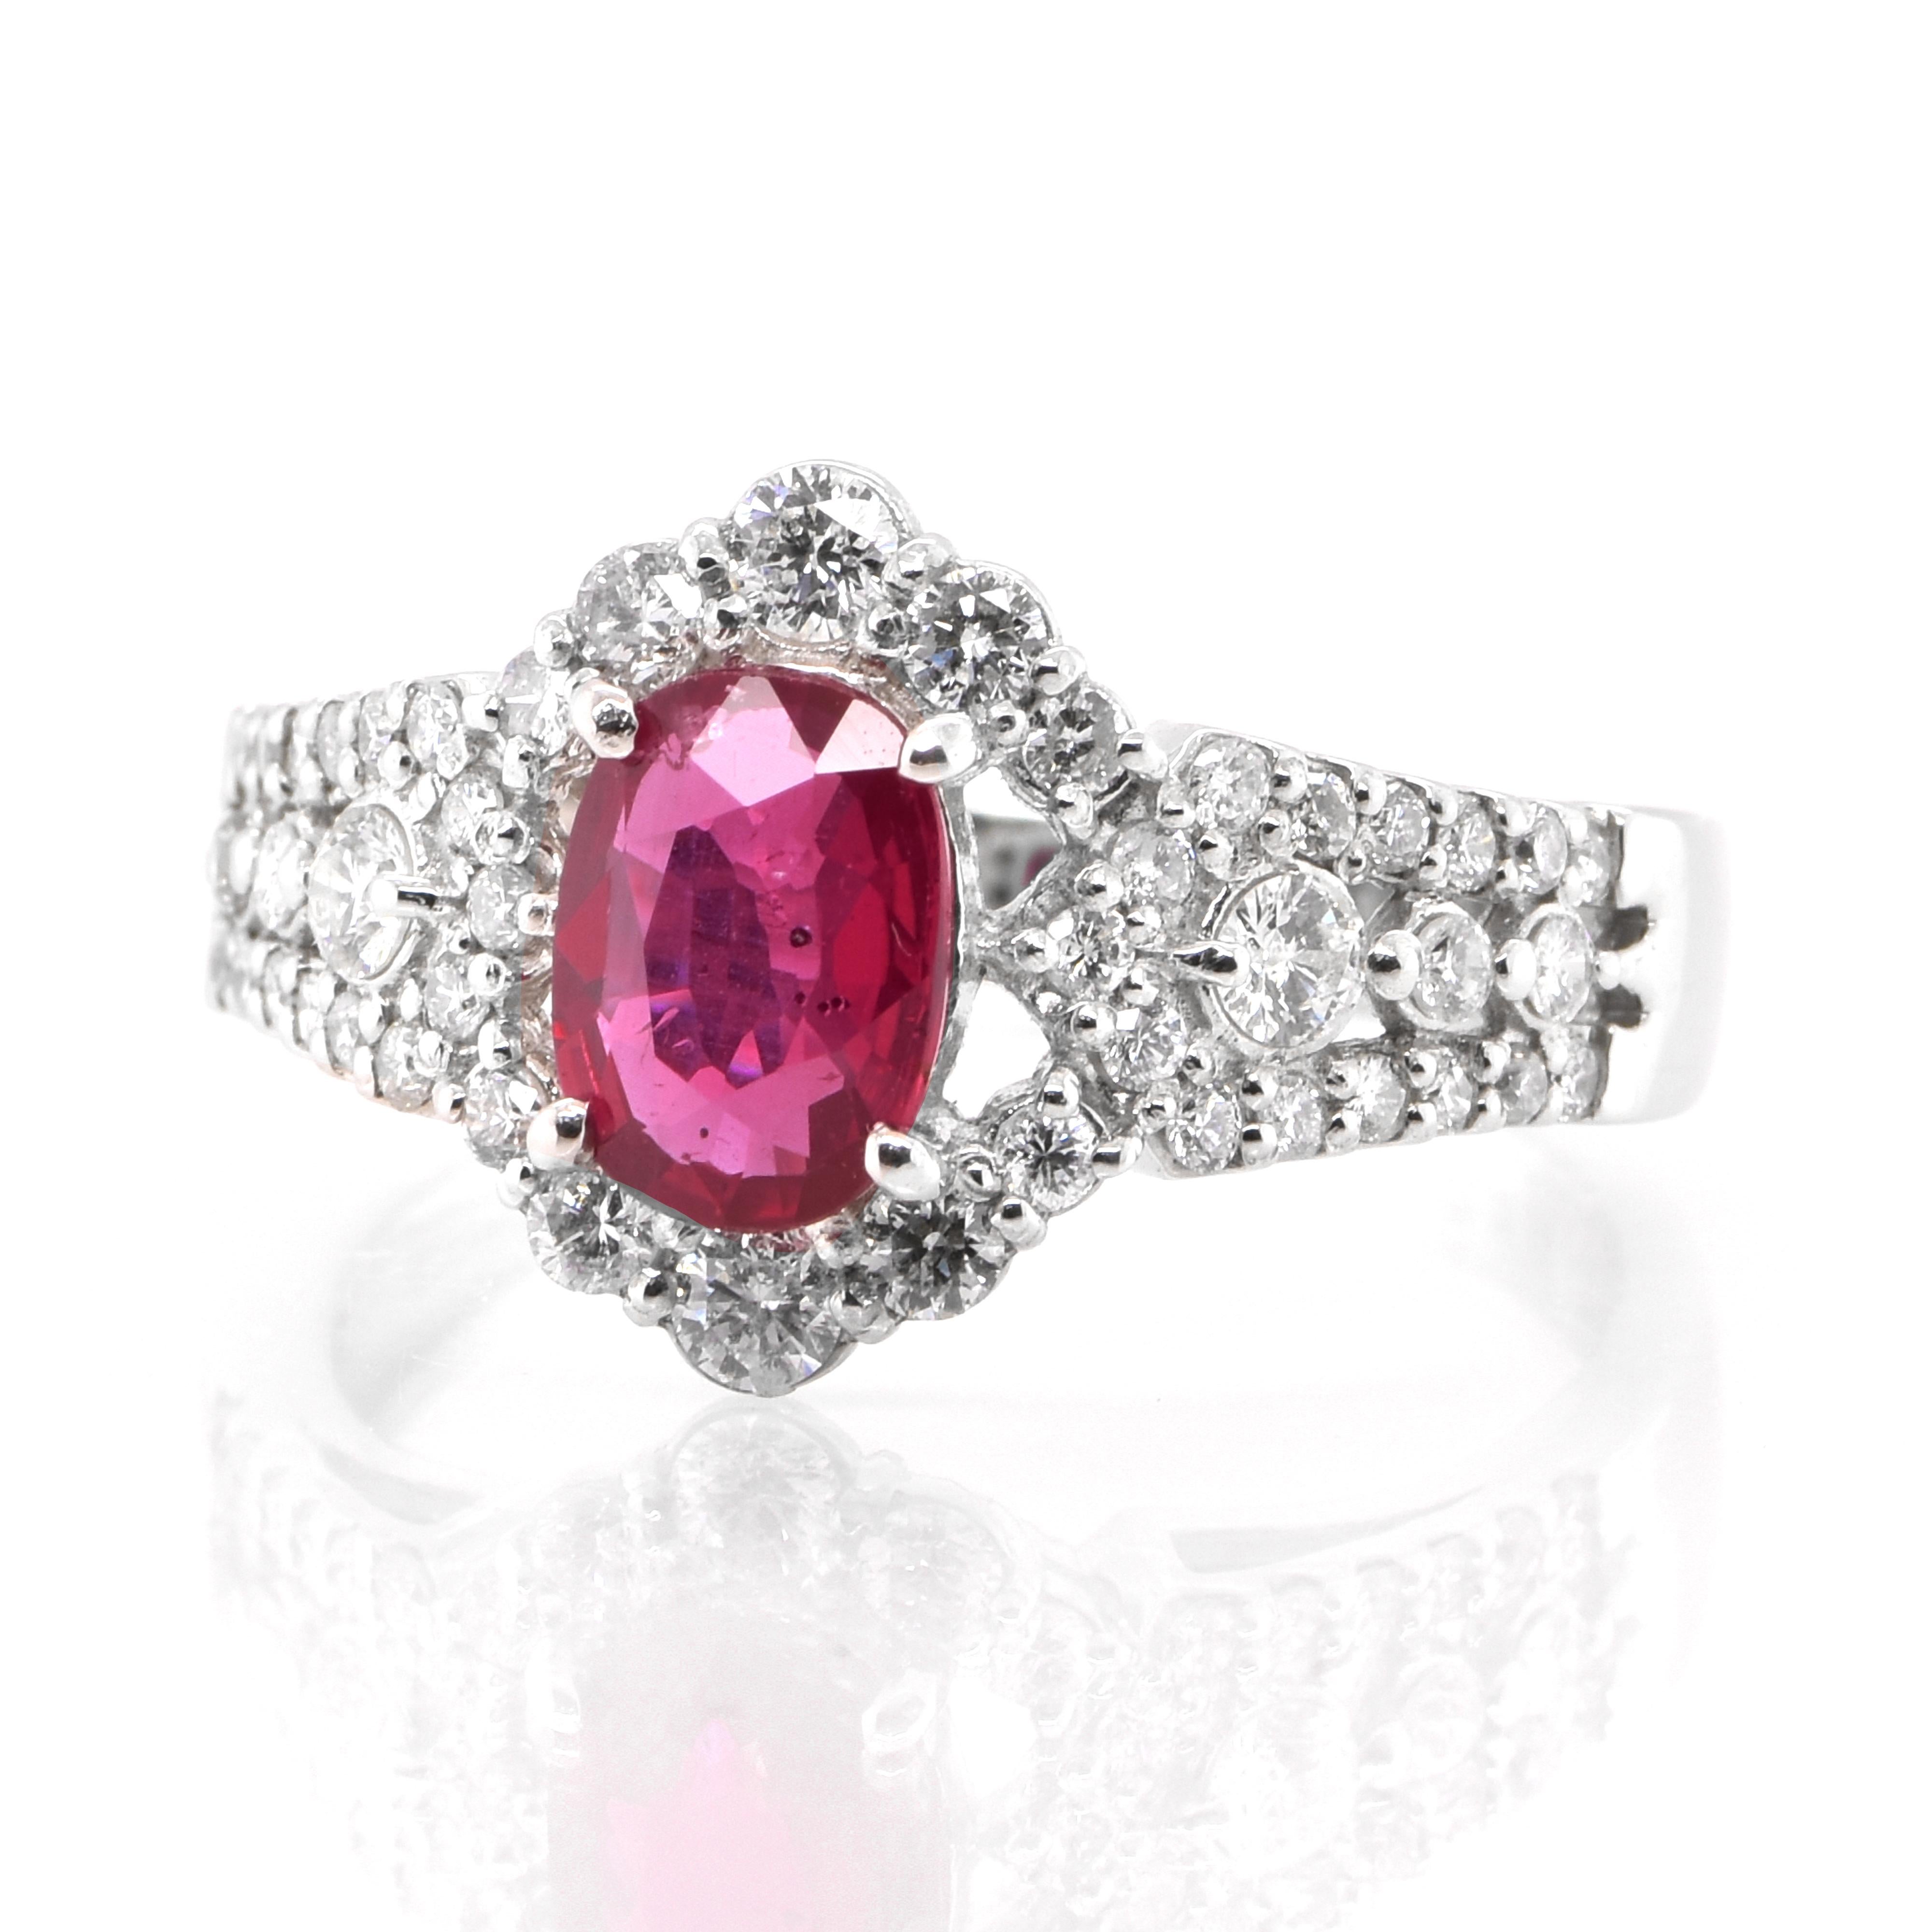 A beautiful Engagement Ring set in Platinum featuring a GIA Certified 1.01 Carat, Natural Untreated (No Heat) and Unfilled Ruby and 0.53 Carats of Diamond Accents. Rubies are referred to as 